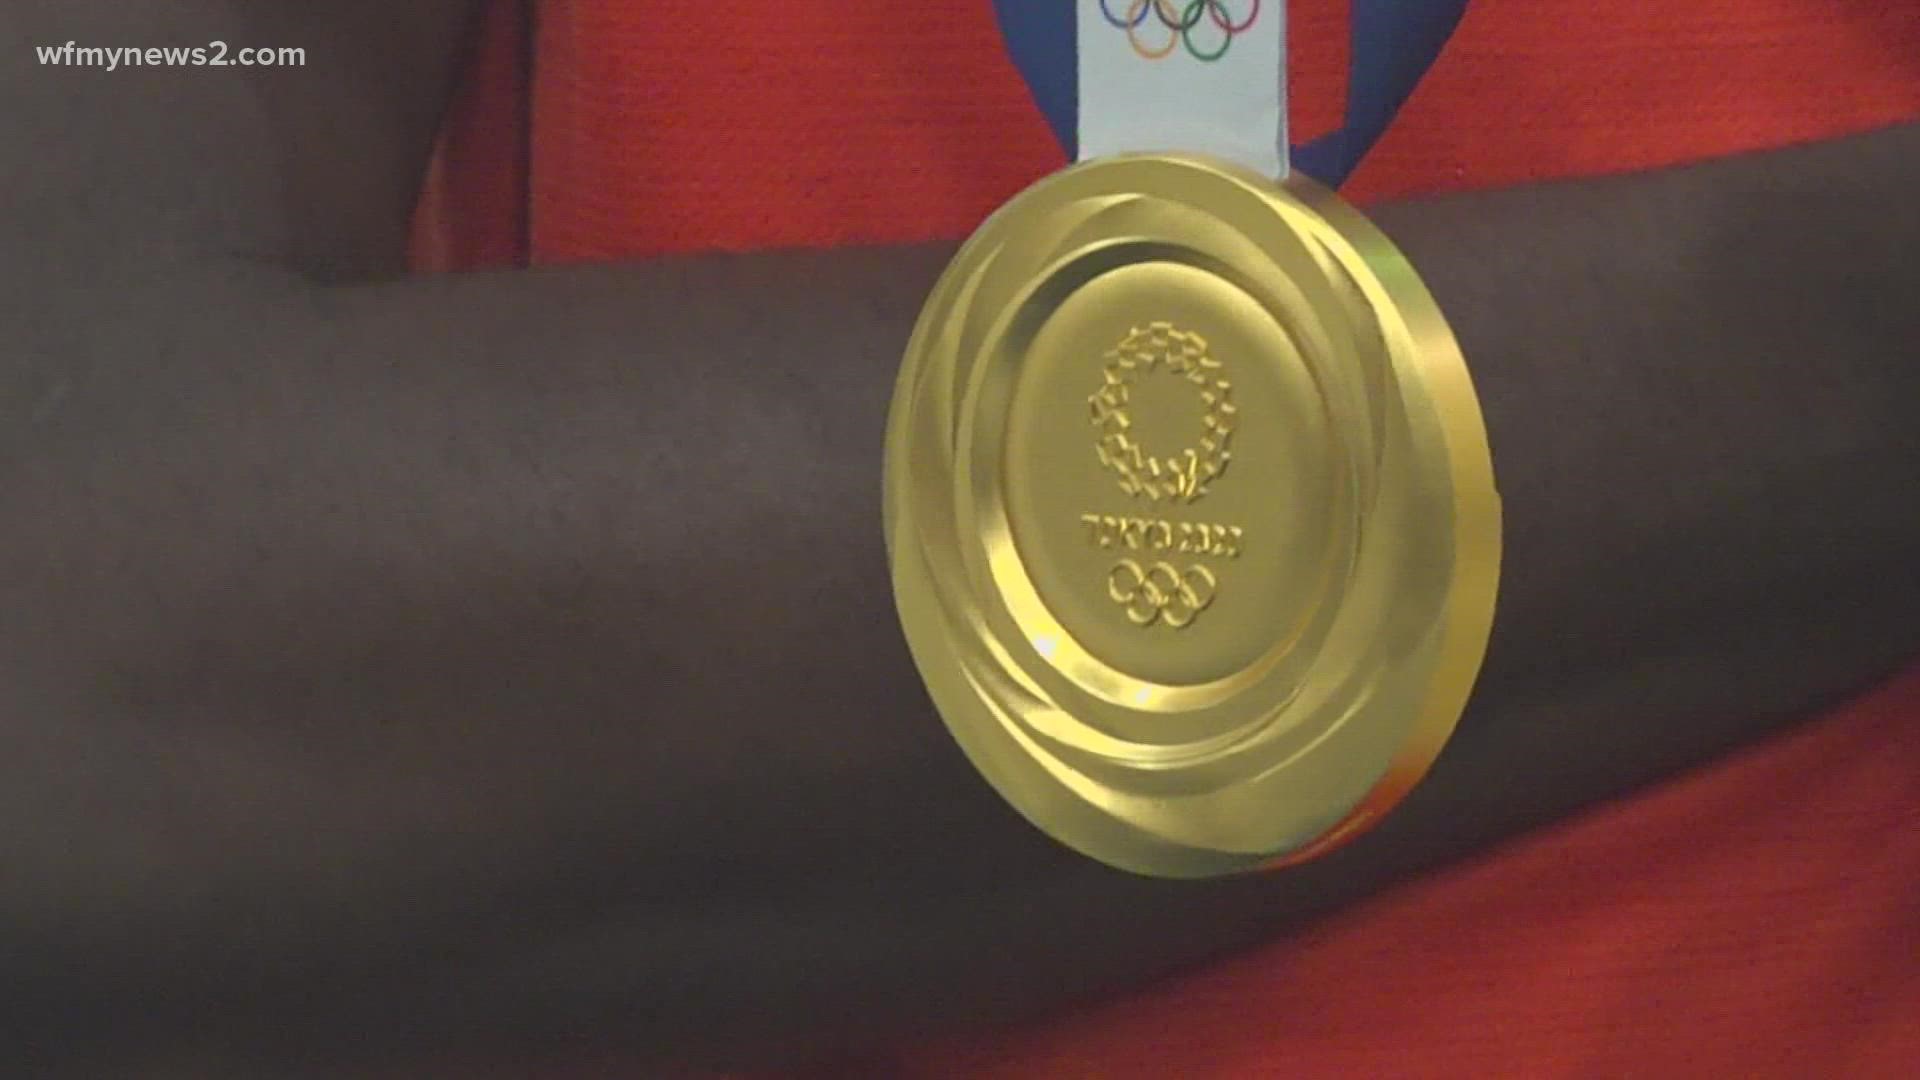 Two NC A&T athletes won medals at the Tokyo 2020 Olympics. They talk about their experience competing in the summer games.